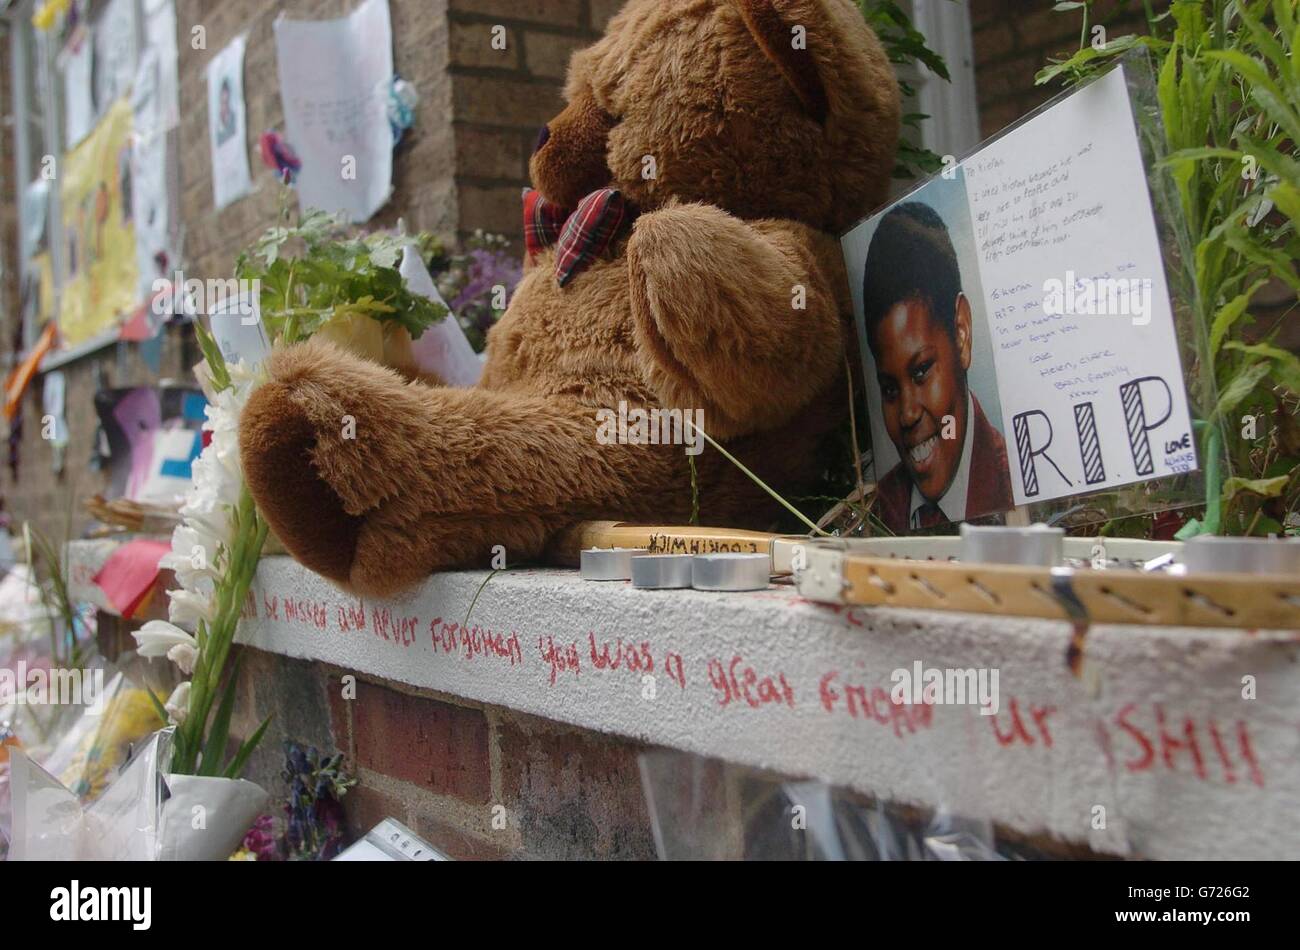 Tributes for mudered schoolboy Kieran Rodney-Davis mount up at a memorial service for the 15-year-old at the spot where he was murdered on Sulivan Court in Fulham, west London. Kieran was stabbed to death there for his mobile phone and two 16-year-olds are in custody allegedly accused of the murder. Stock Photo